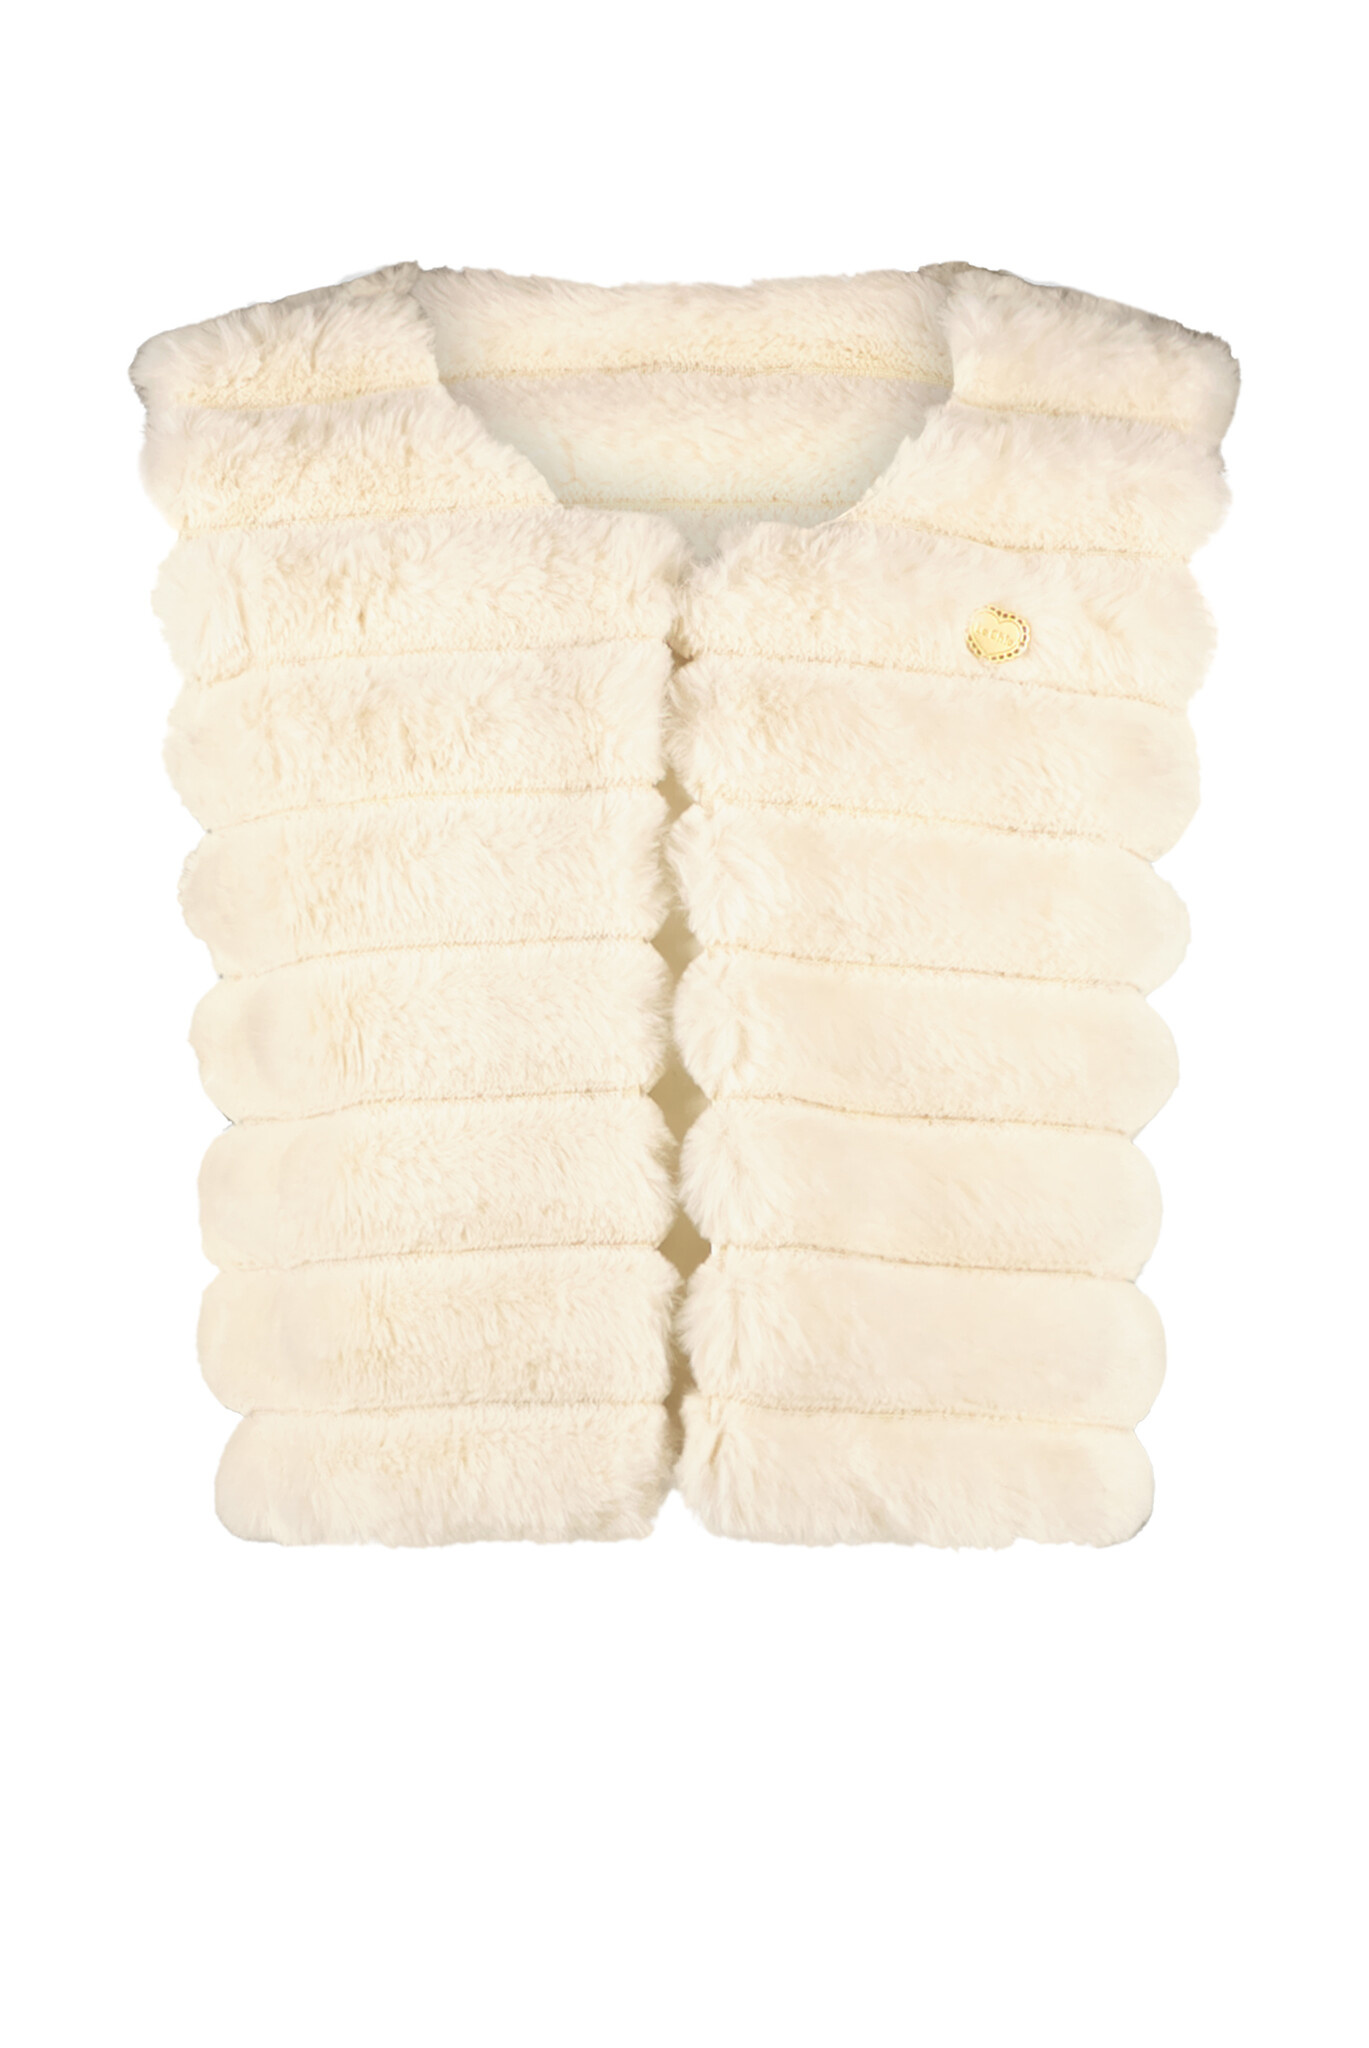 Le Chic C308-5106 Meisjes Gilet - Pearled Ivory - Maat 152